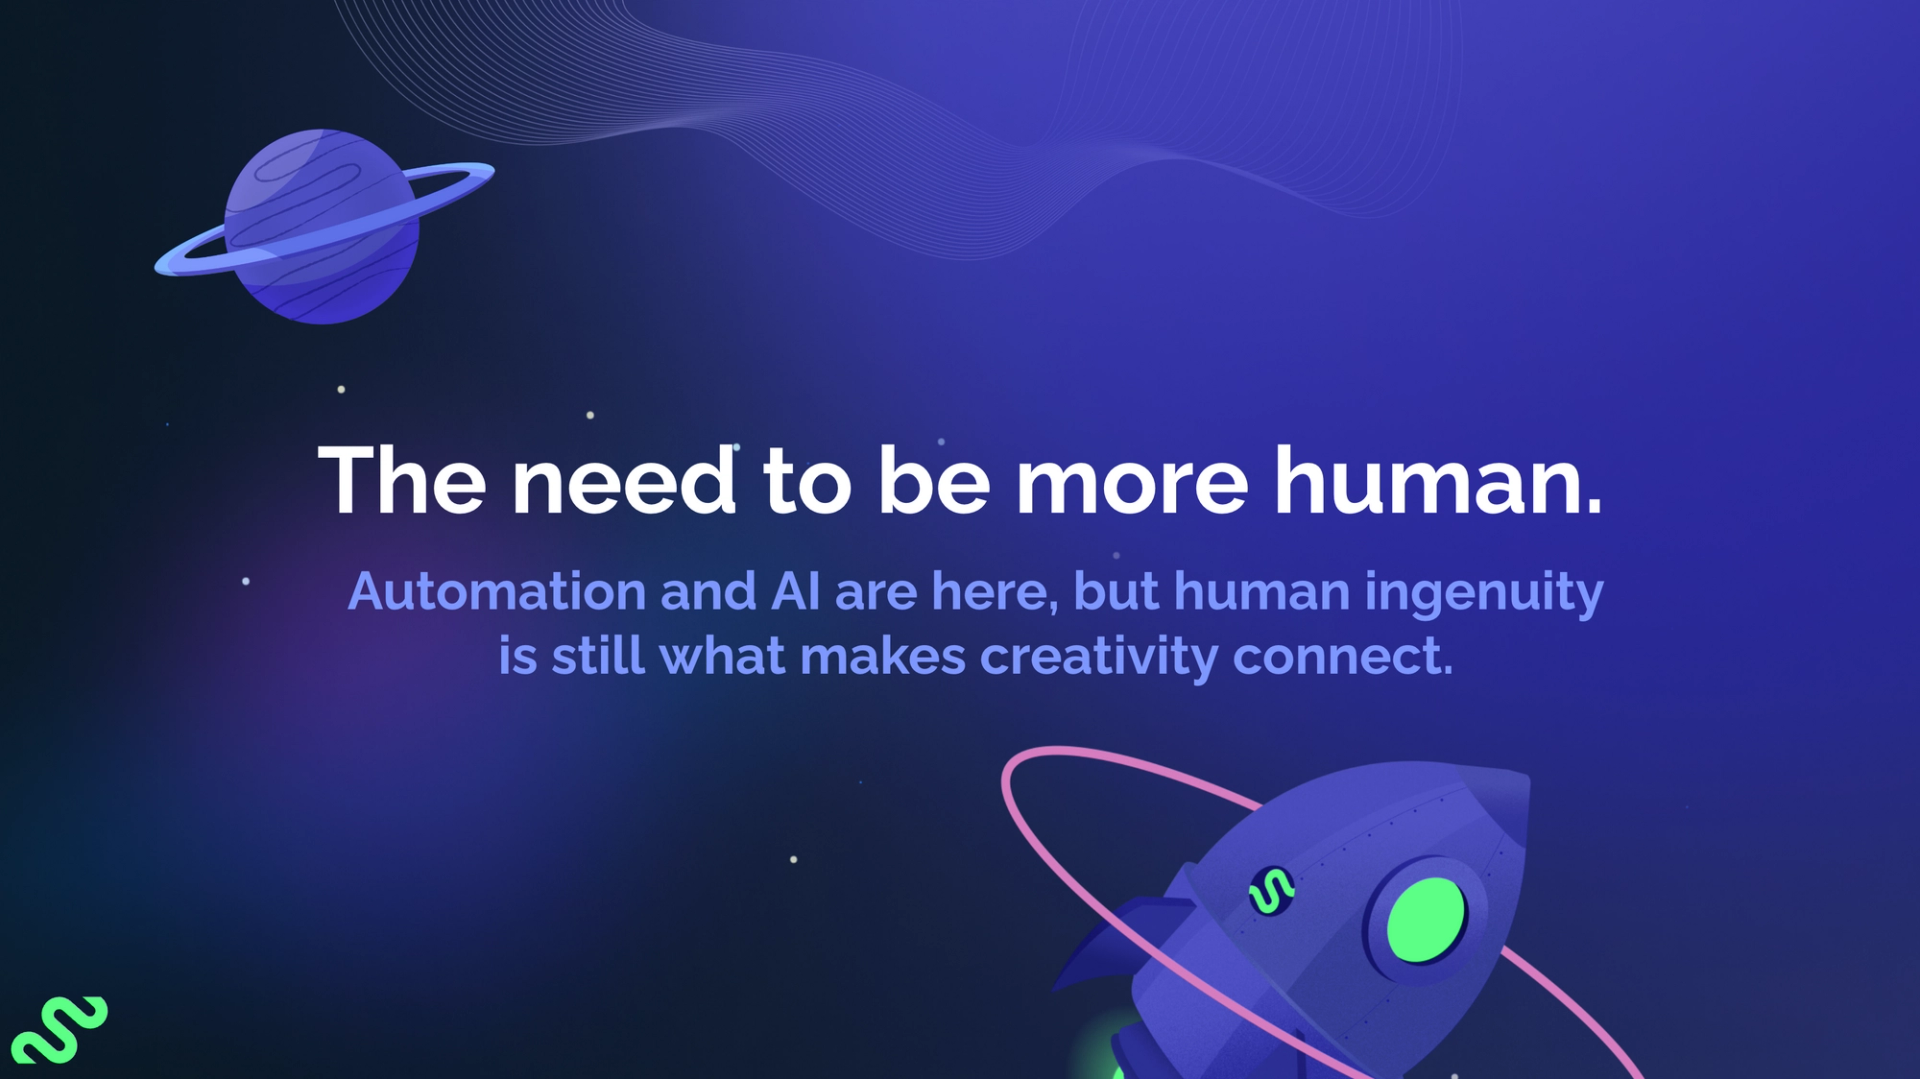 The need to be more human. Automation and AI are here, but human ingenuity is still what makes creativity connect.